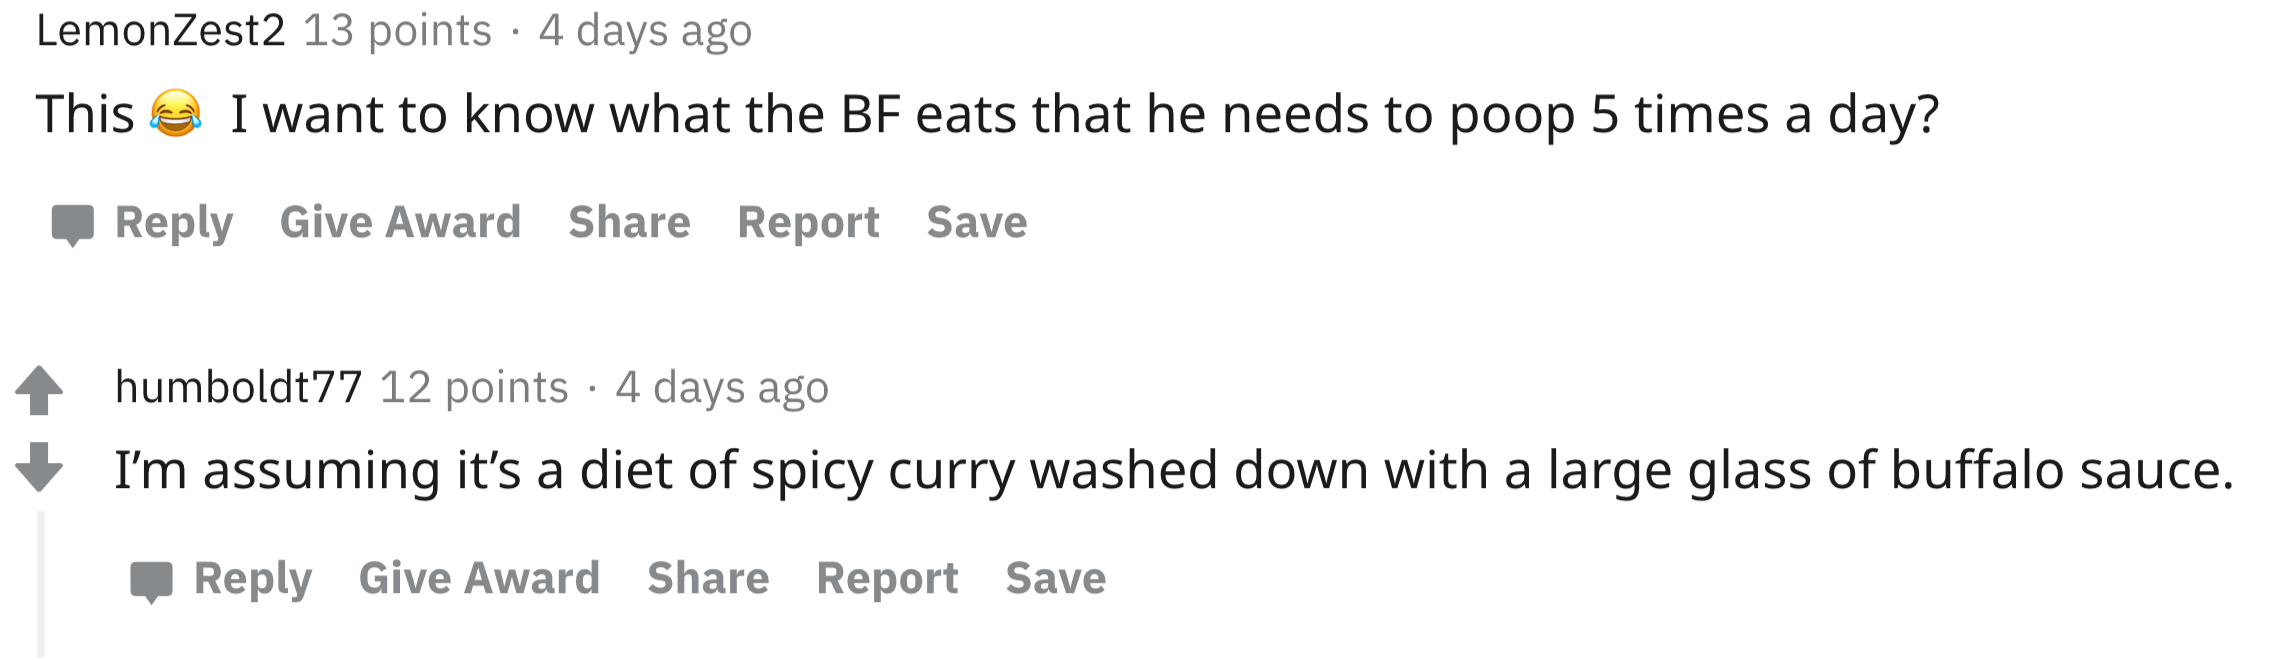 This I want to know what the Bf eats that he needs to poop 5 times a day? - I'm assuming it's a diet of spicy curry washed down with a large glass of buffalo sauce.